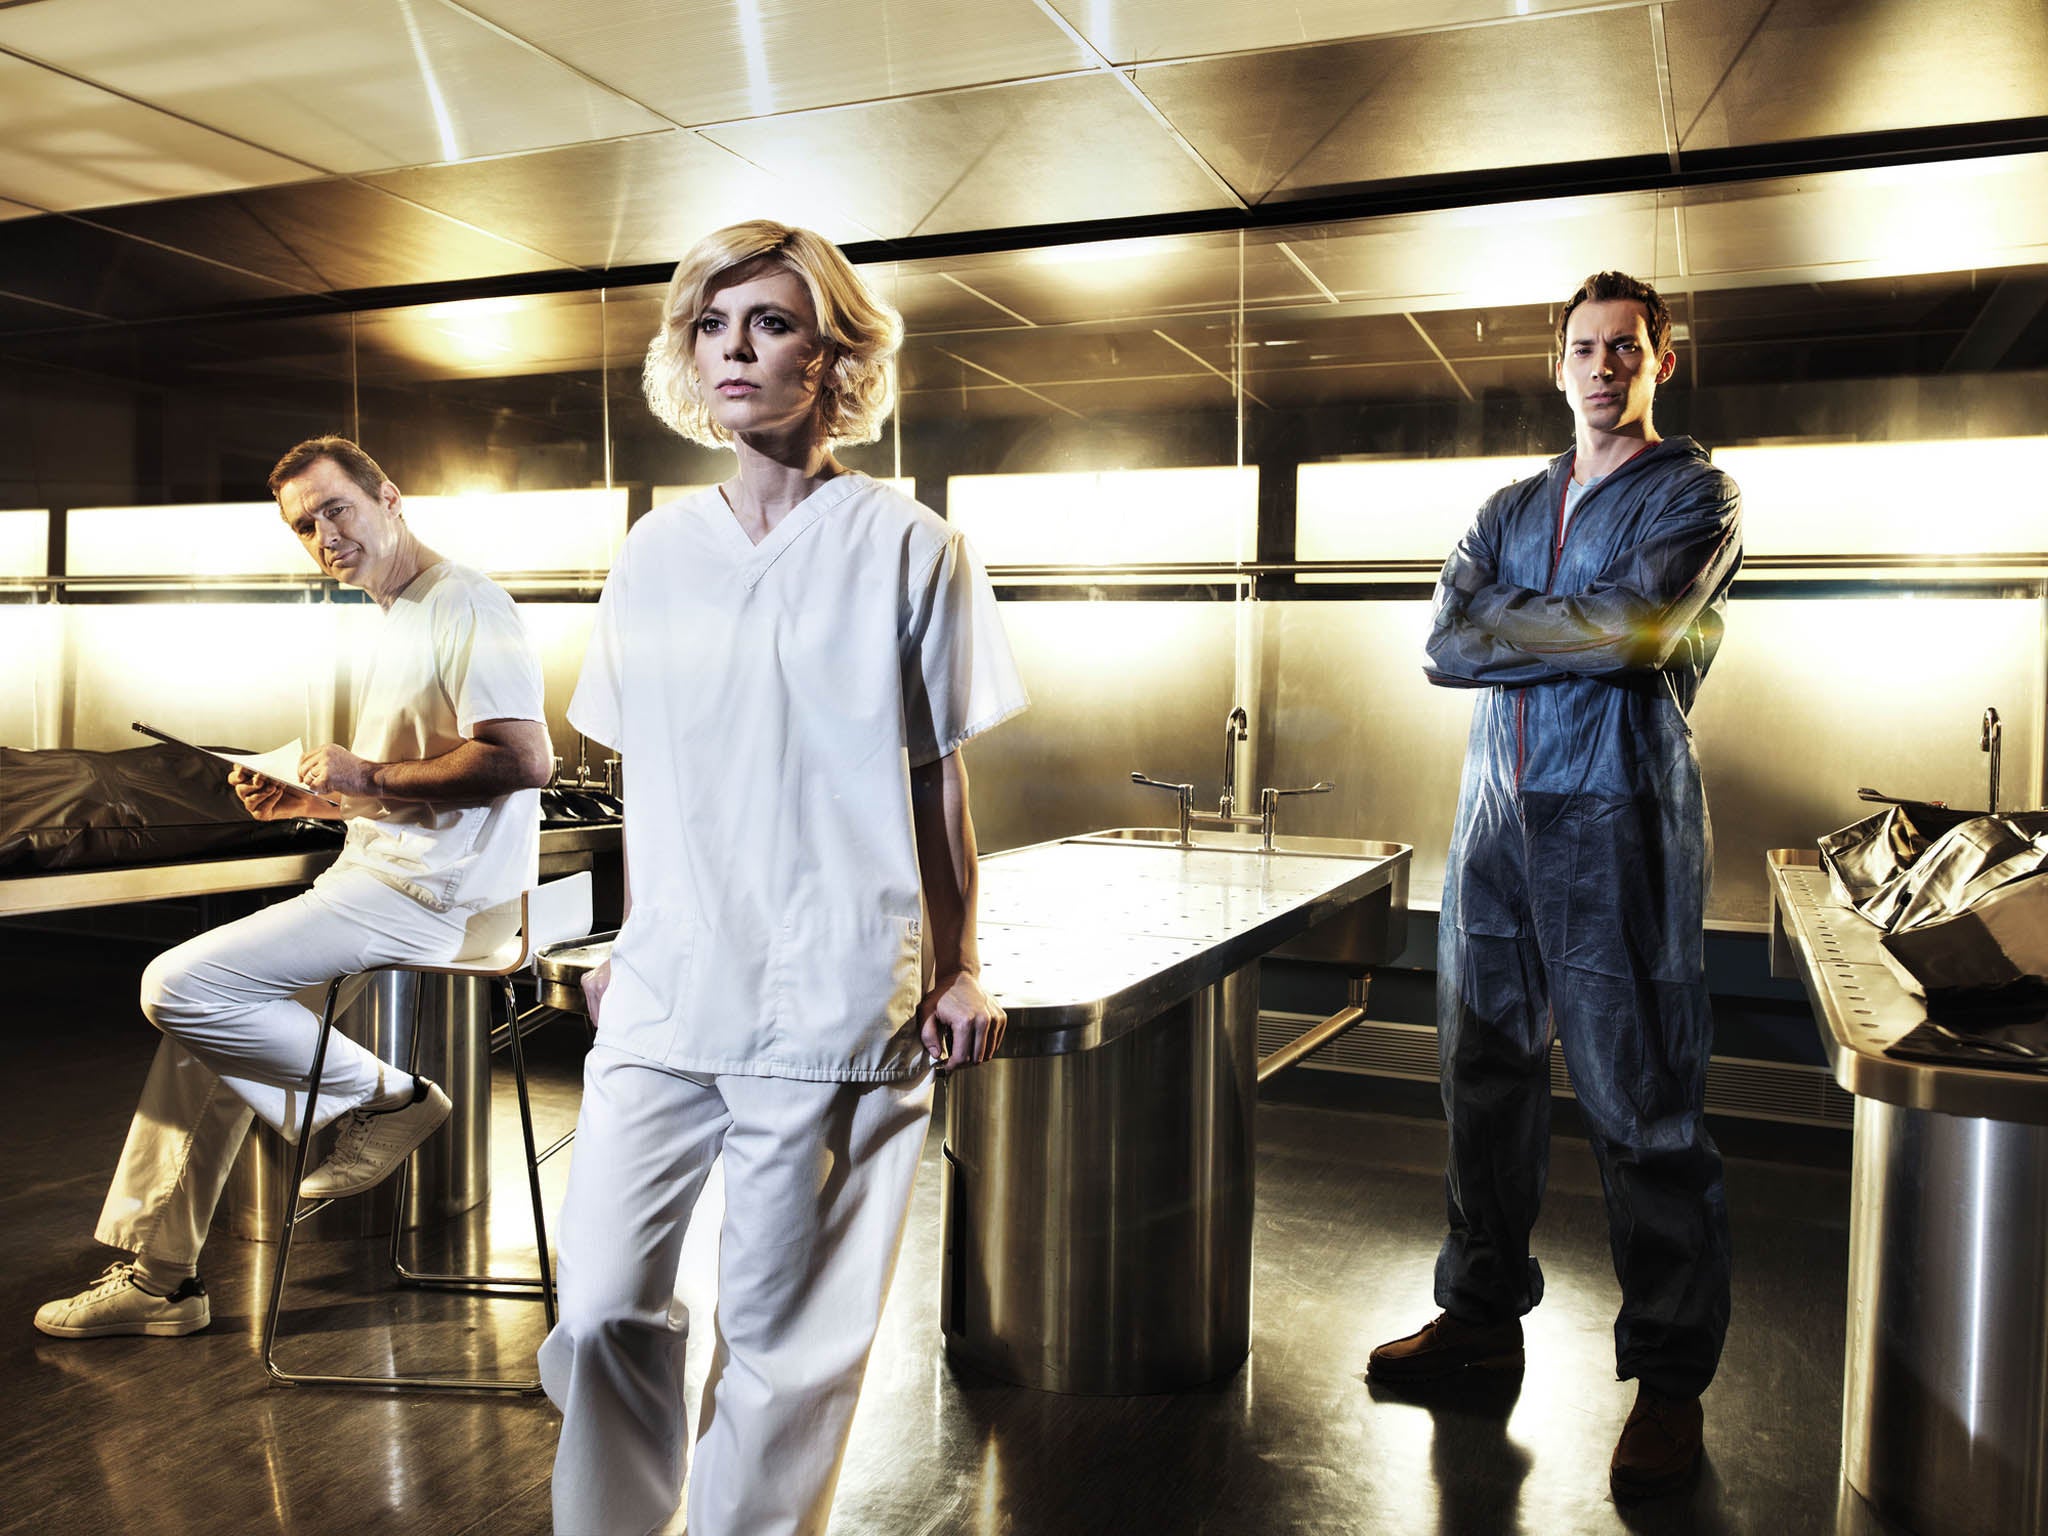 were silent witness cast friends in real life